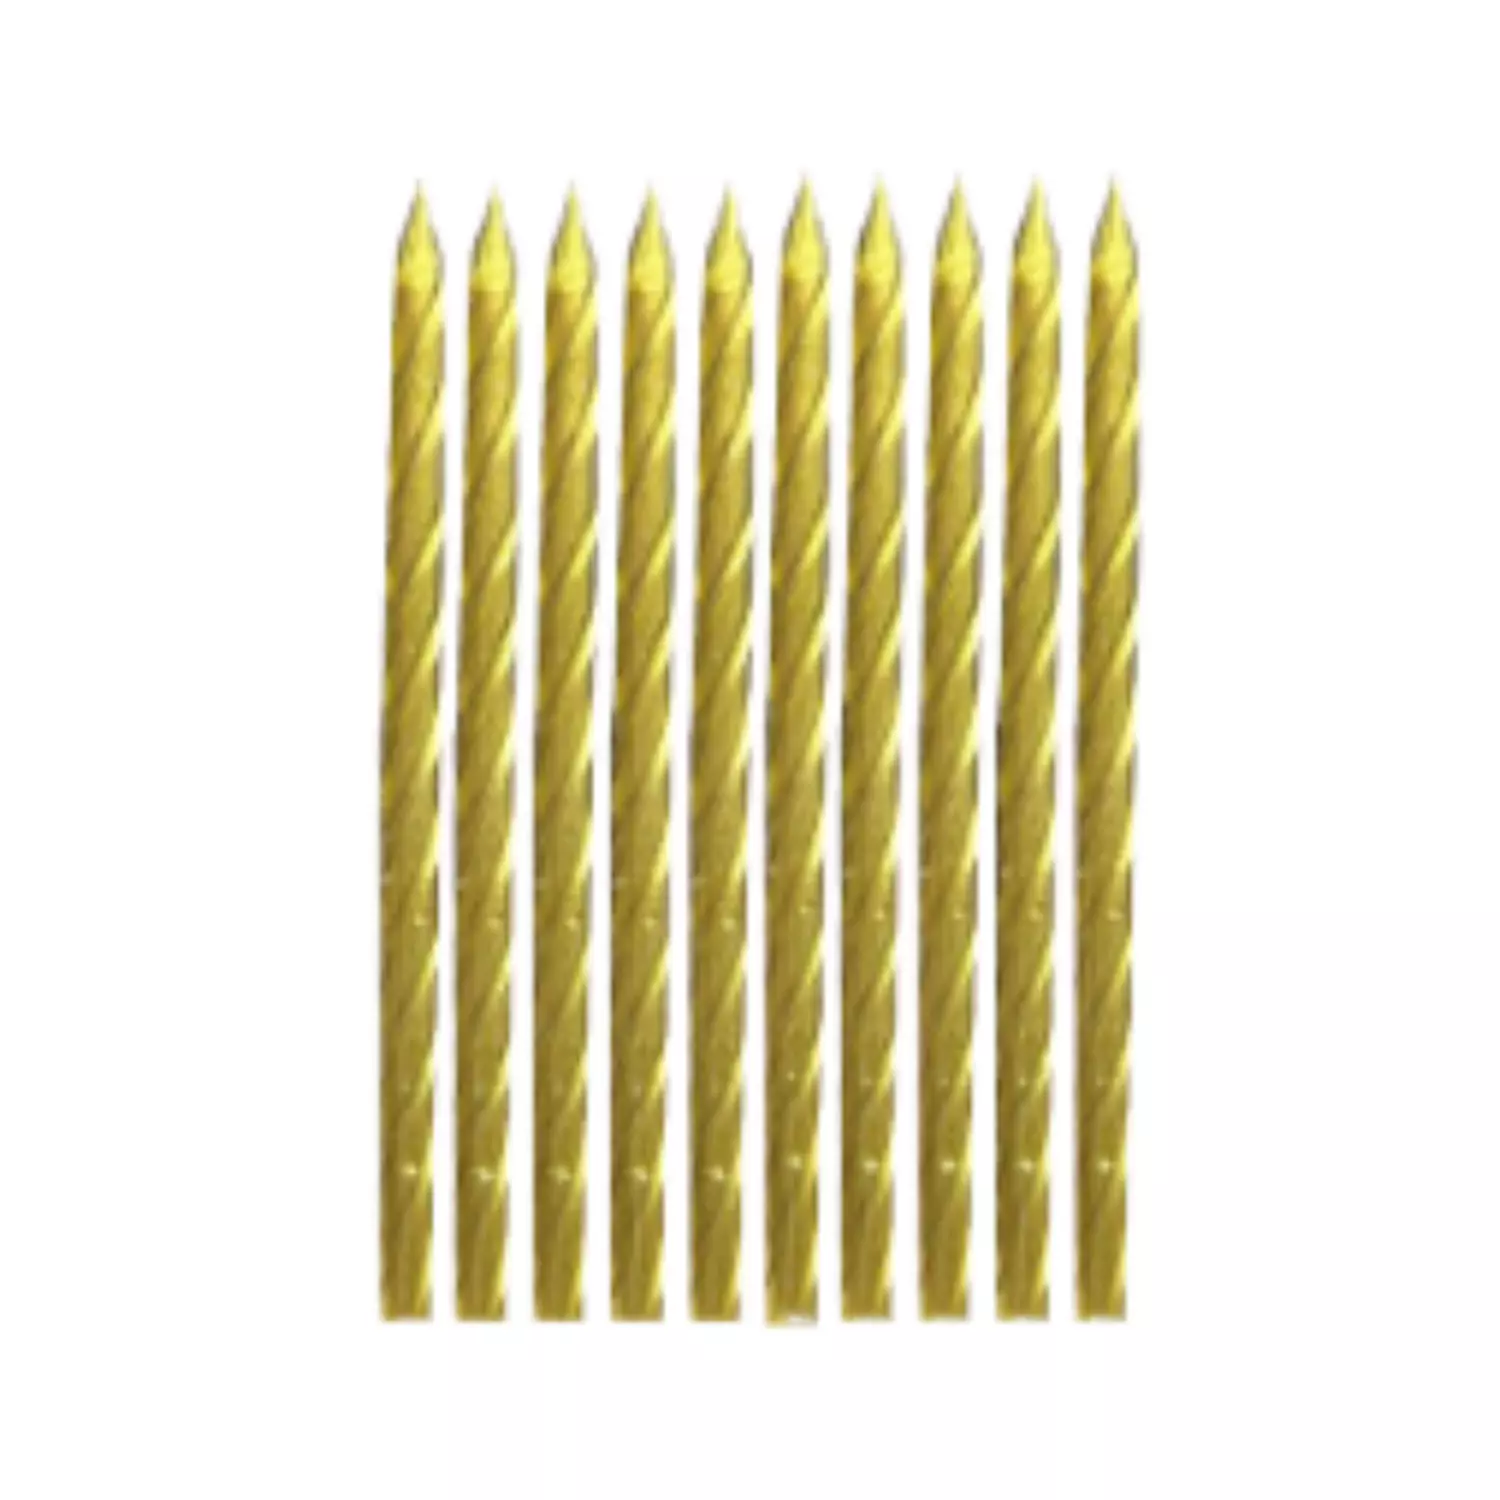 Gold Candle Set hover image